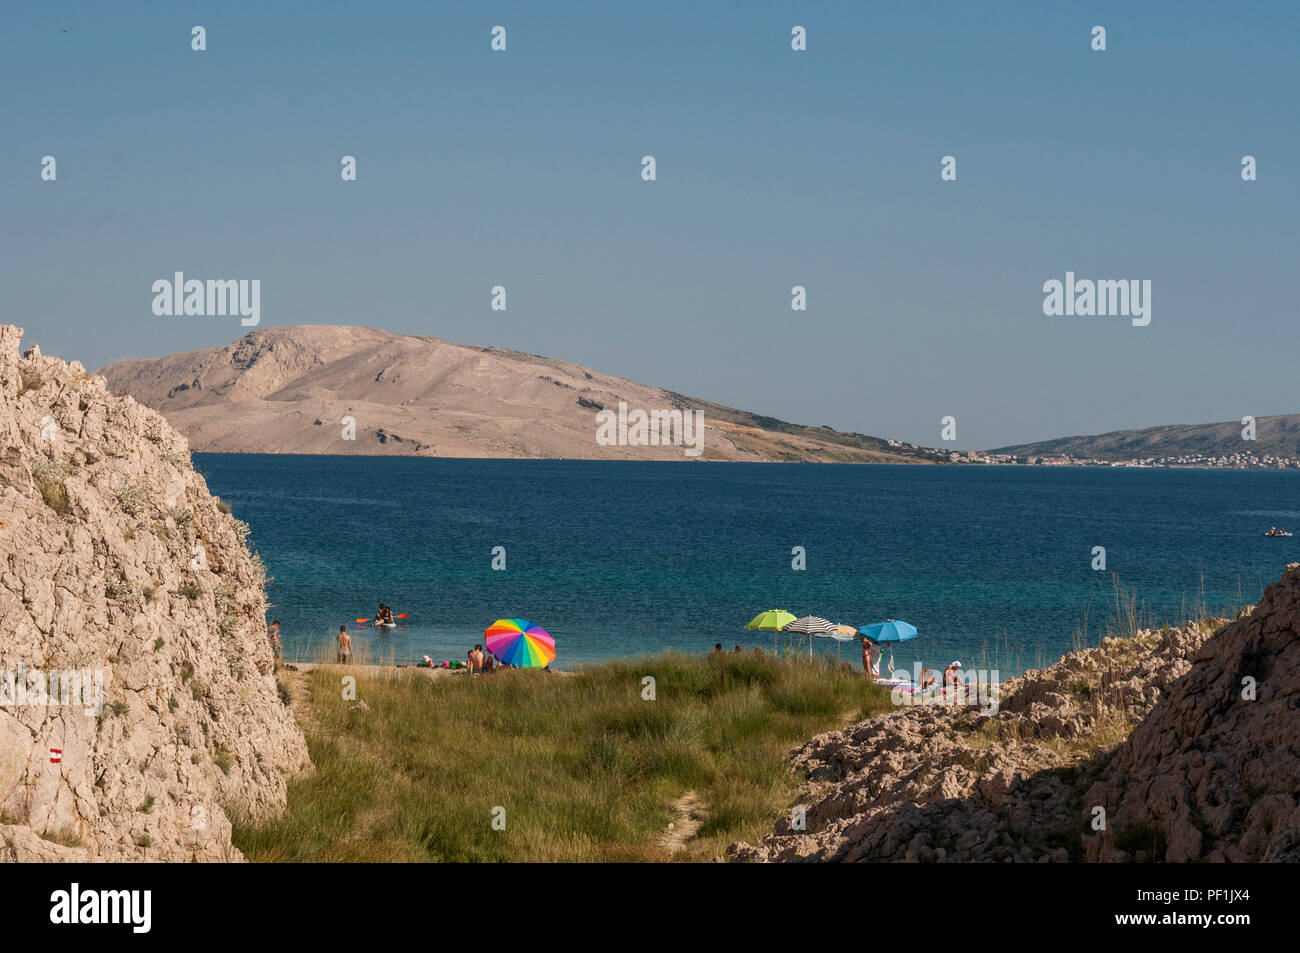 Pag Island, Croatia: rainbow beach umbrella in the grass at Rucica, pebbled beach nestled in a barren bay with green plants and desert landscape Stock Photo